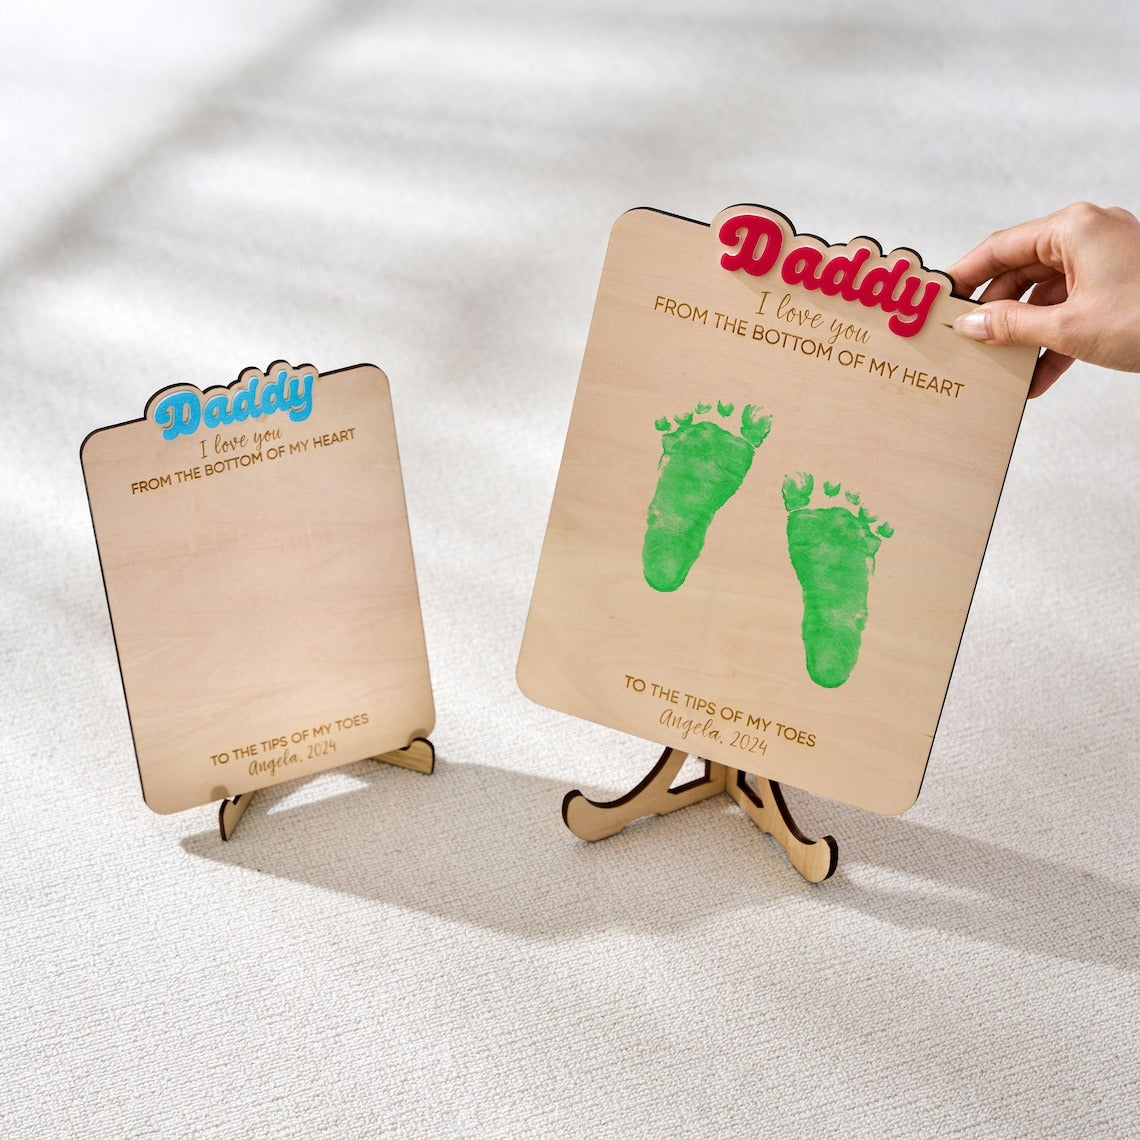 Father's Day Footprint DIY Craft, Personalized Kids' Footprint, Father’s Day Gifts, Father’s Day Sign, Gift for Dad, Gift for Grandpa